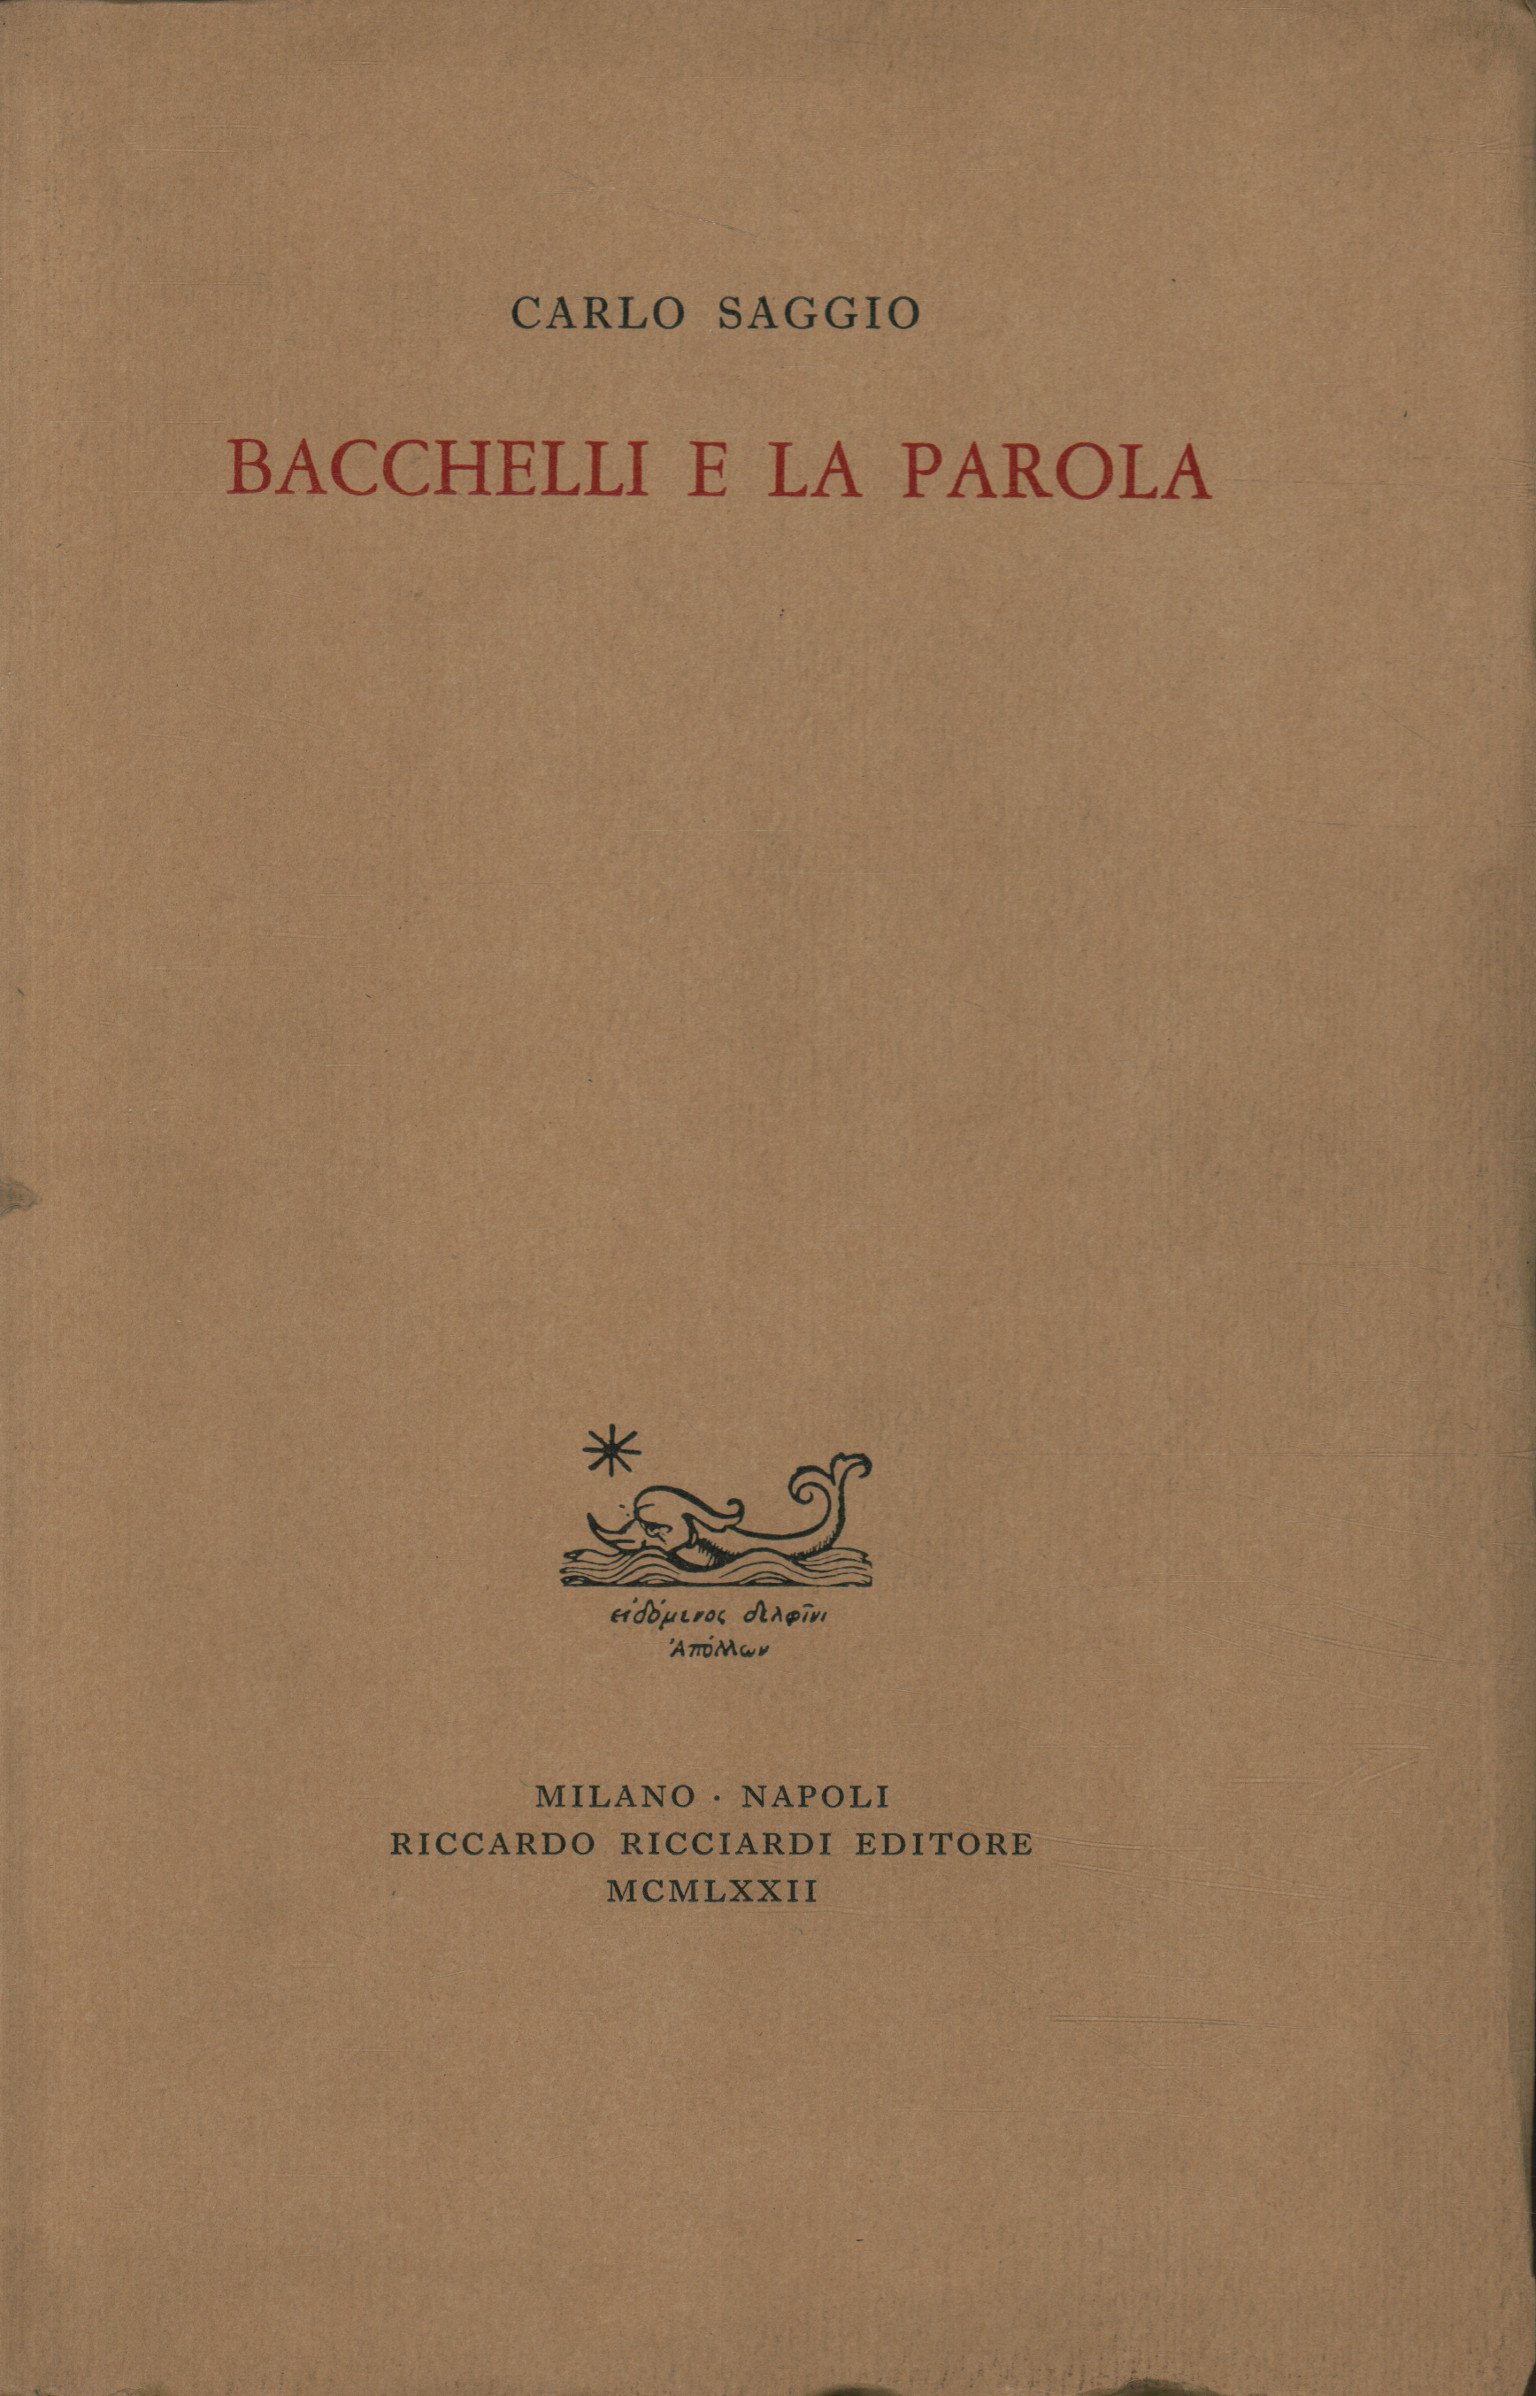 Bacchelli and the word